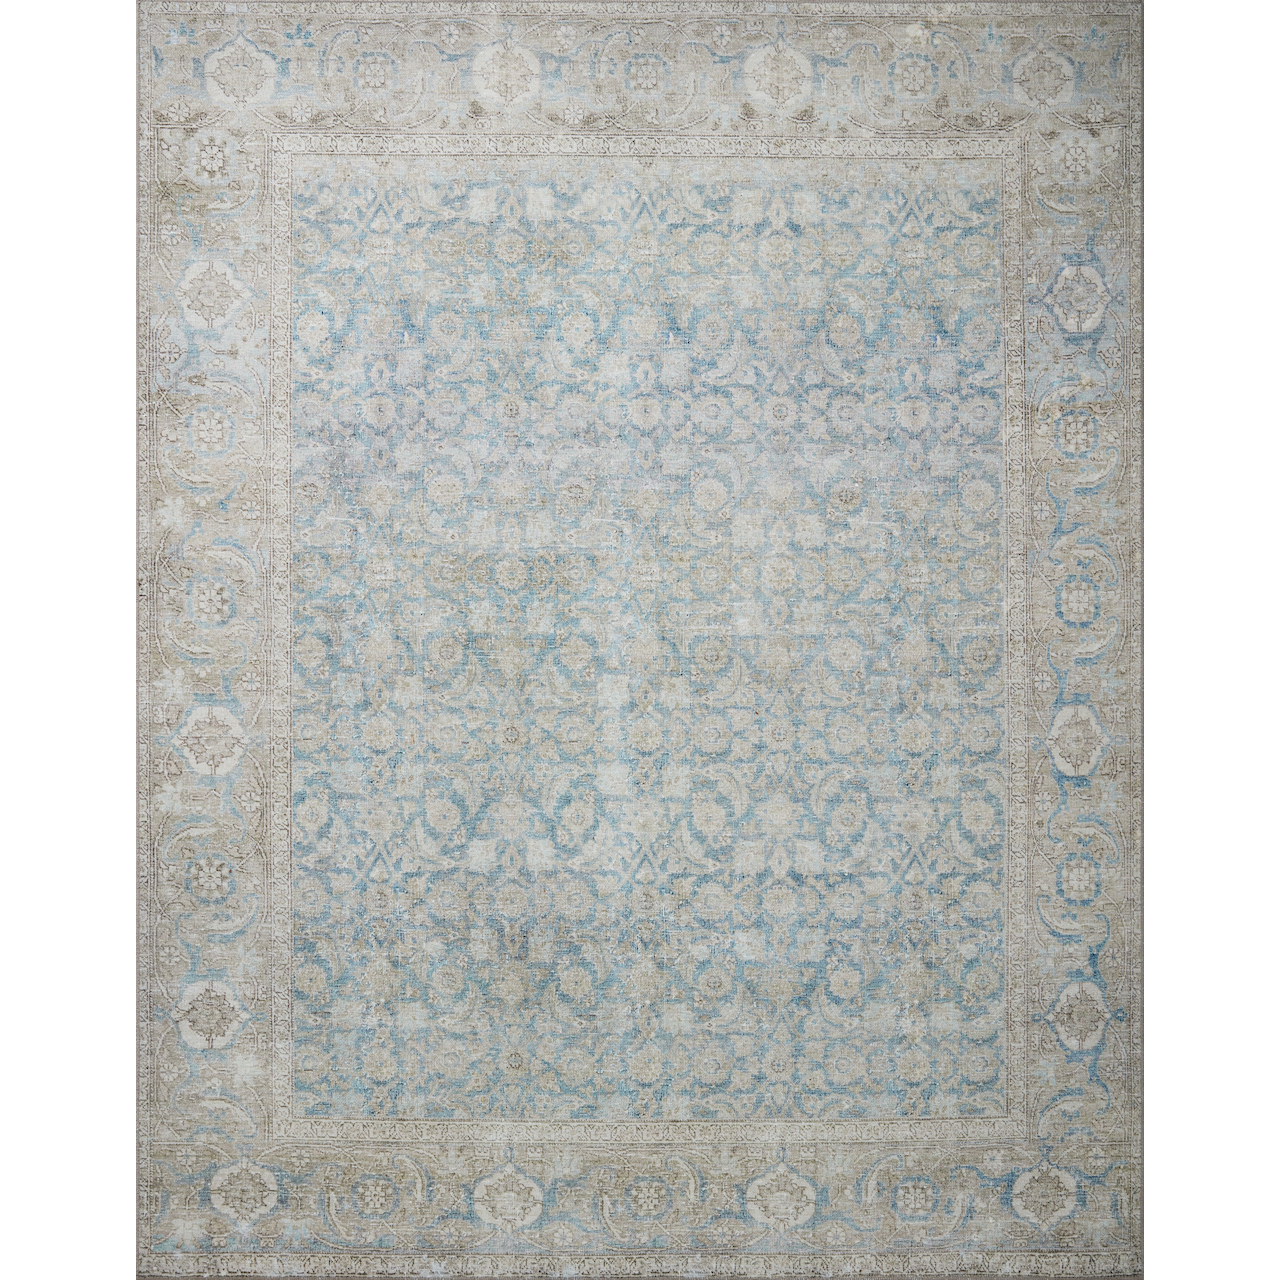 Power-loomed of 100% polyester, the Wynter Ocean / Silver WYN-10 area rug from Loloi showcases a one-of-a-kind vintage or antique area rug look at an affordable price. The rug is ideal for high traffic areas due to the rug's durability making it perfect for living rooms, dining rooms, kitchens, hallways, entryways. Amethyst Home provides interior design, new construction, custom furniture, and rugs for the Omaha and Lincoln metro area.